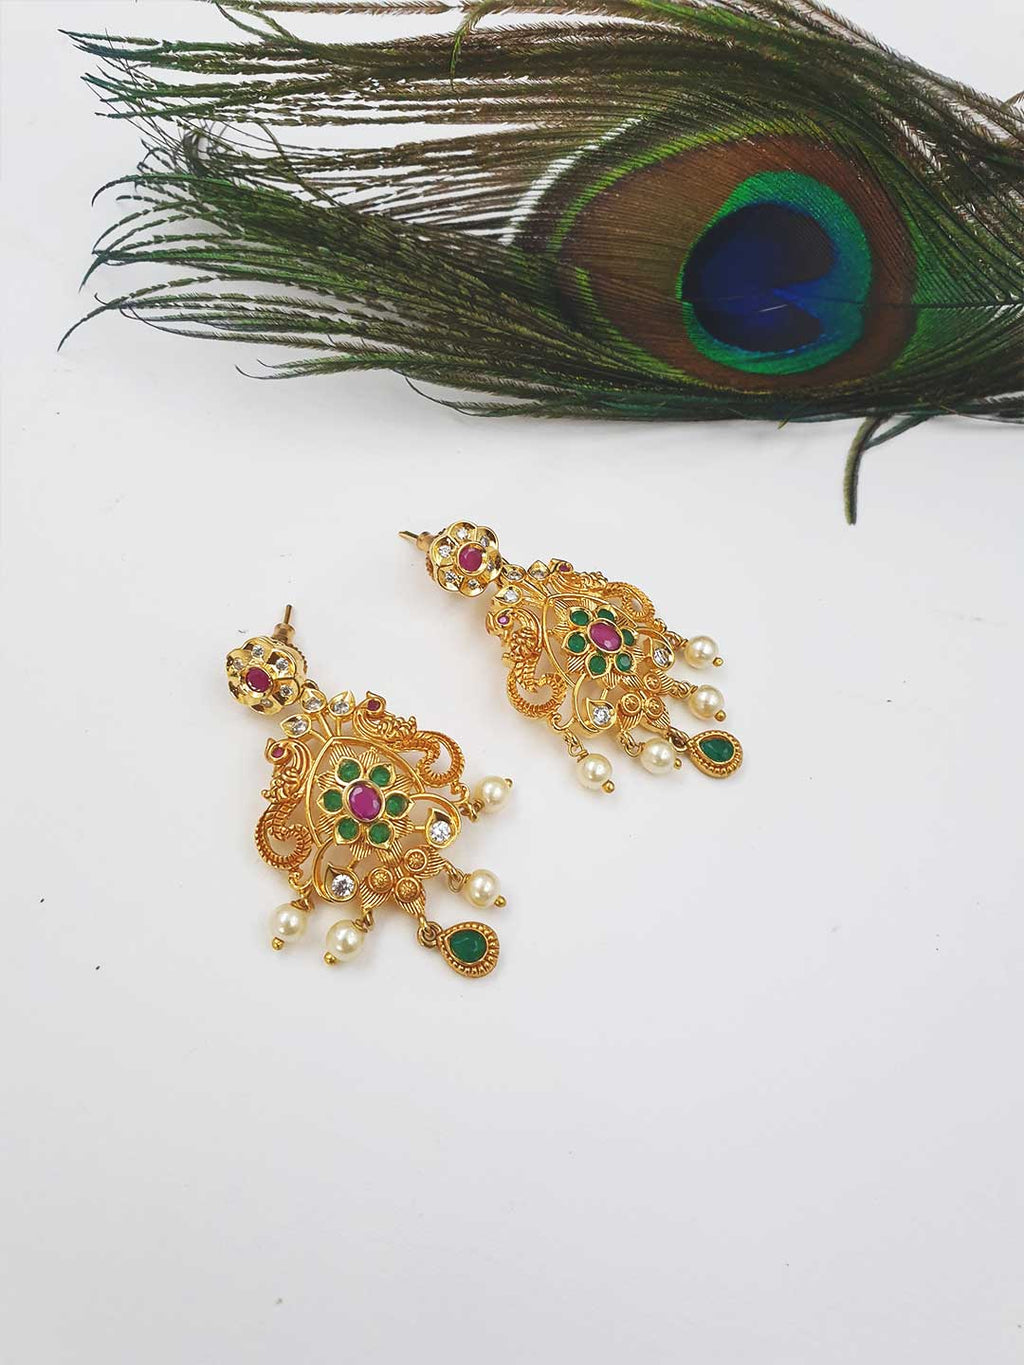 Cute peacock designer necklace with earrings - VCCNE9013